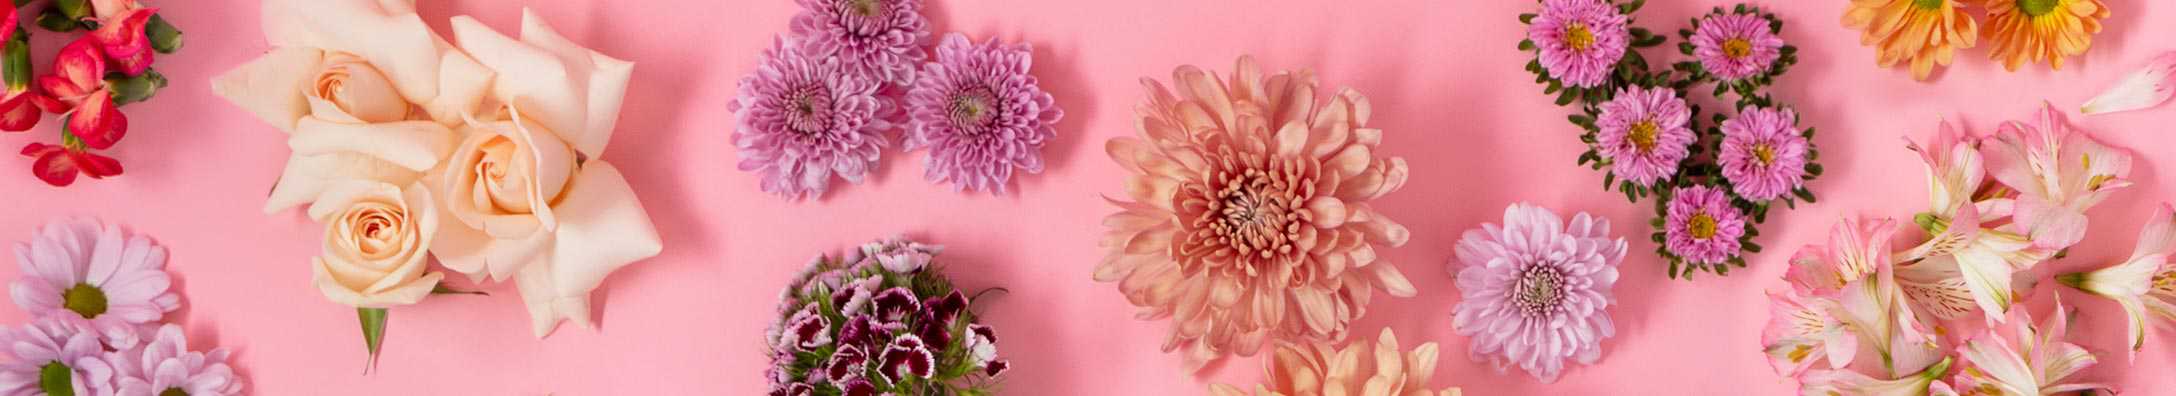 variety of flowers on a pink tabletop